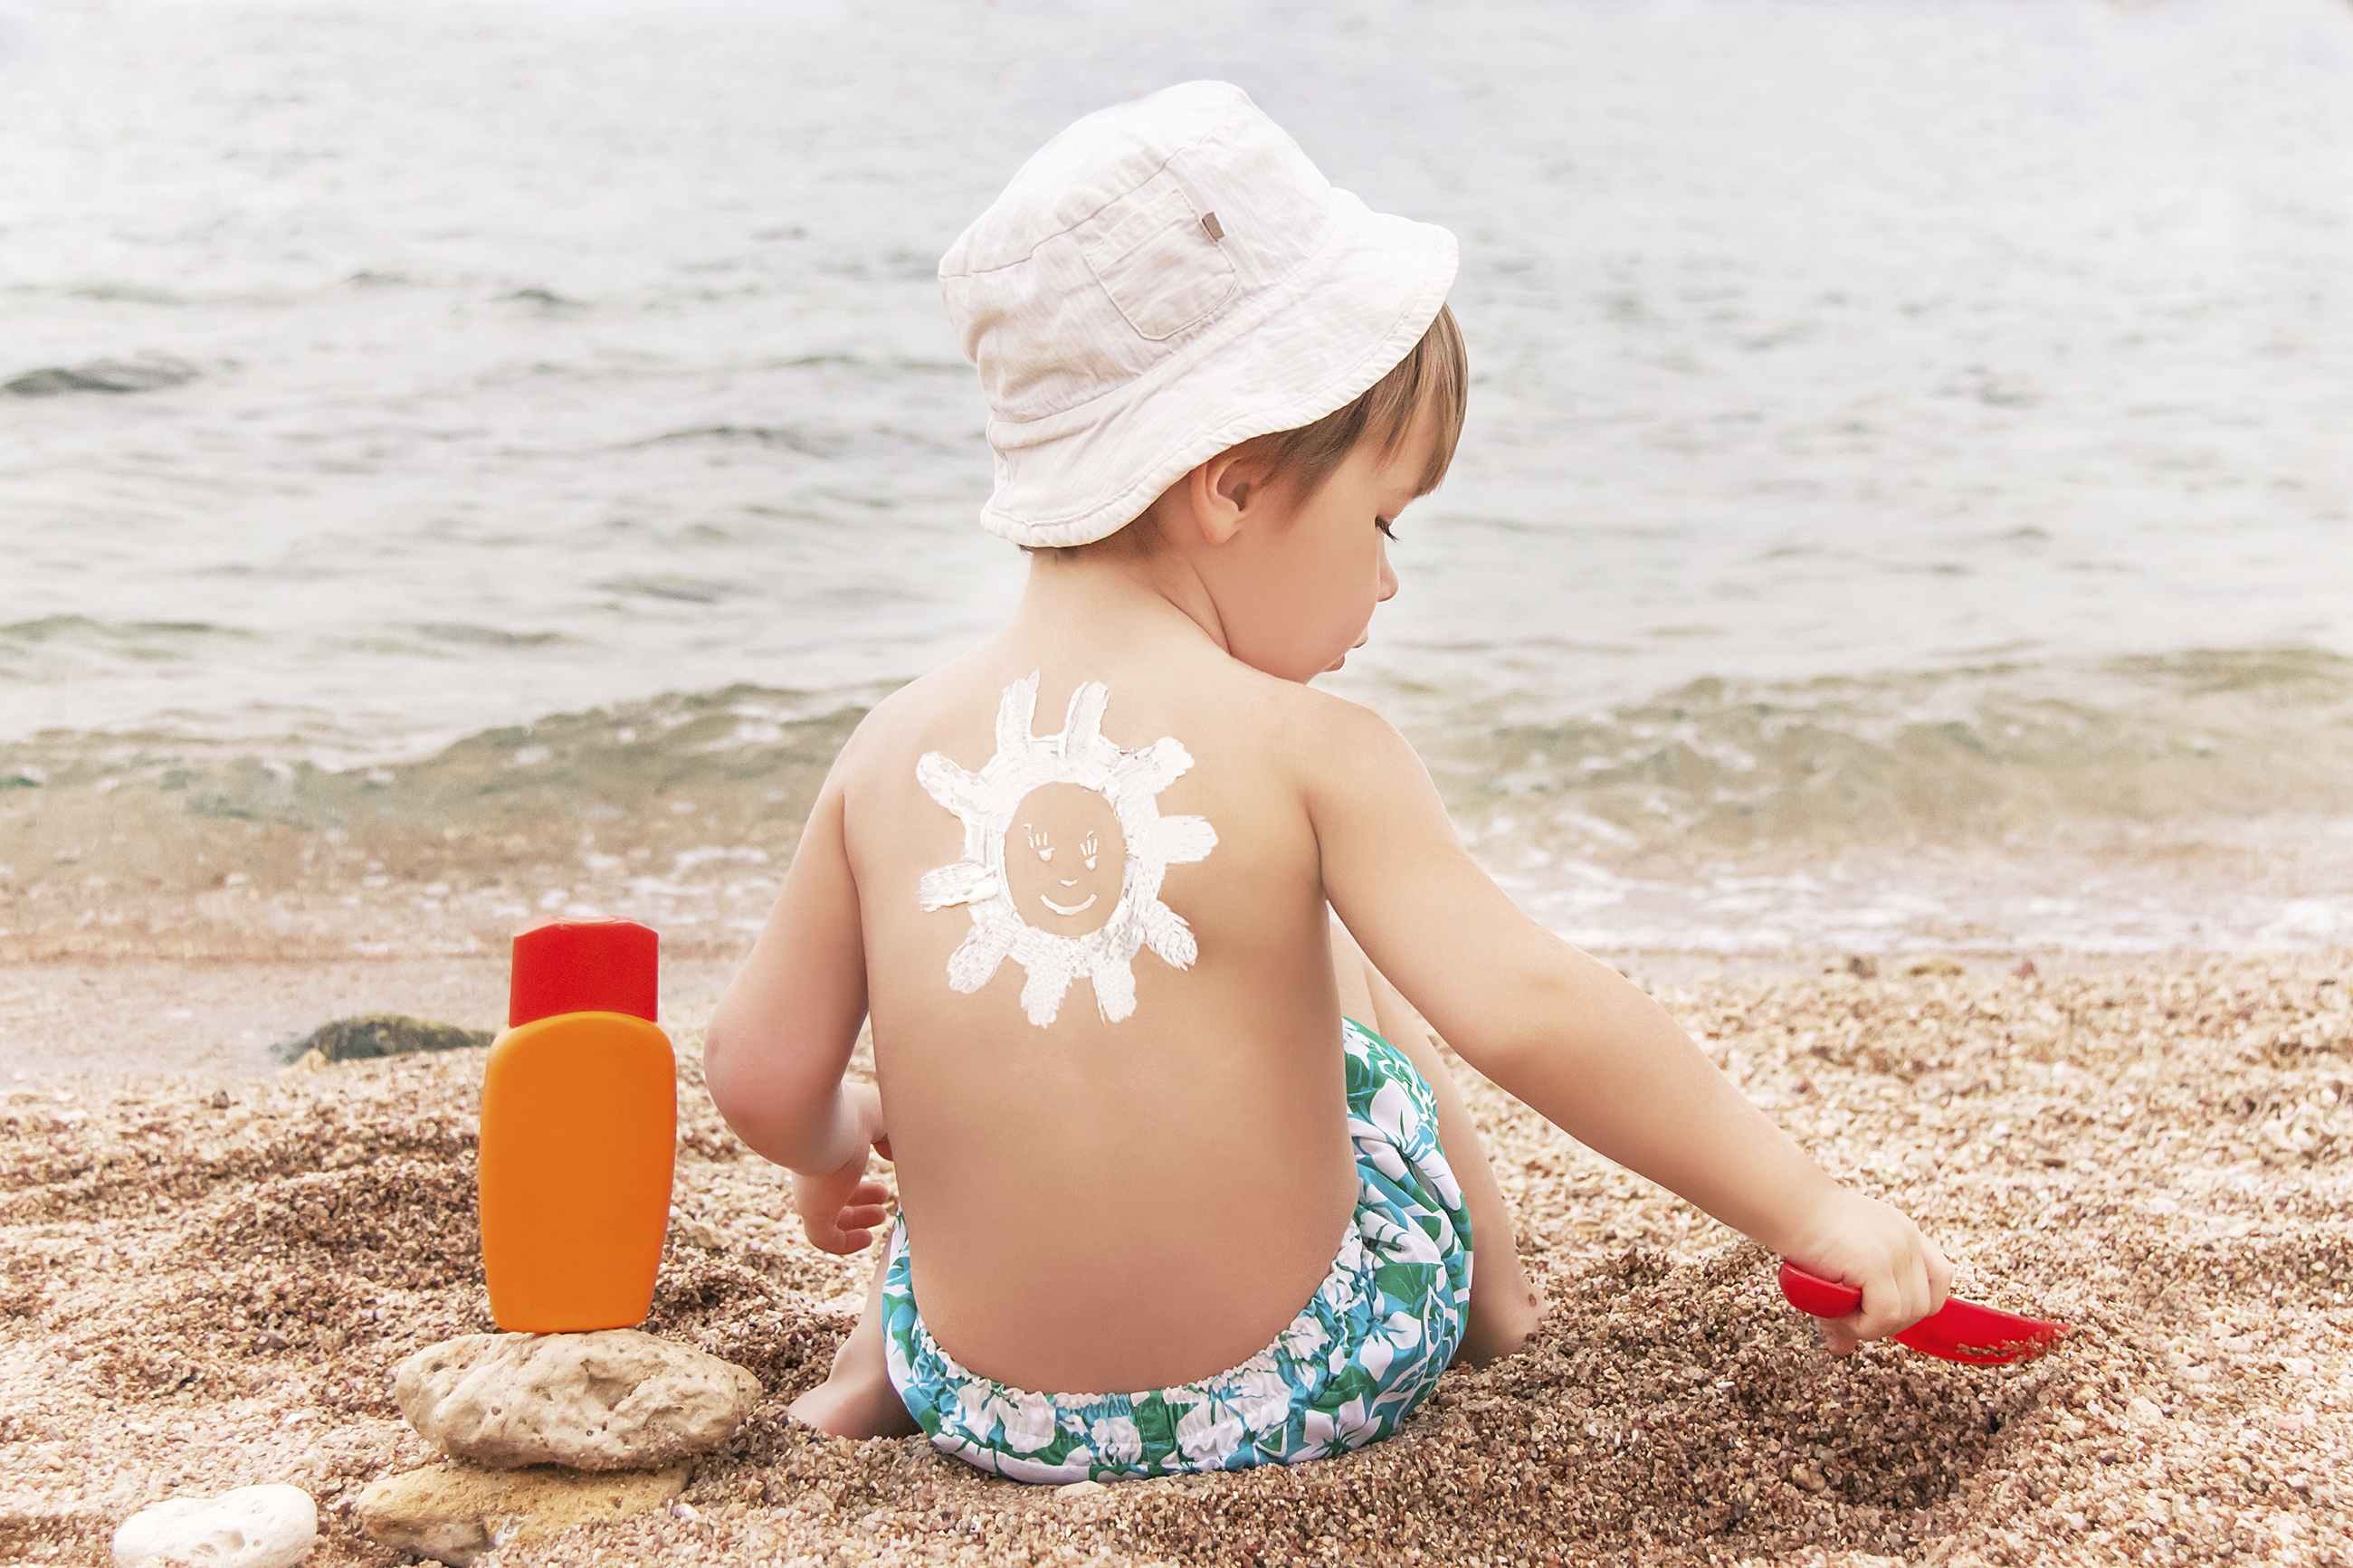 The sun drawing sunscreen (suntan lotion) on baby (boy)  back. Caucasian child is sitting with plastic container of sunscreen and toy on sunny beach. Close up, outdoor (Sharm El Sheikh, Egypt).